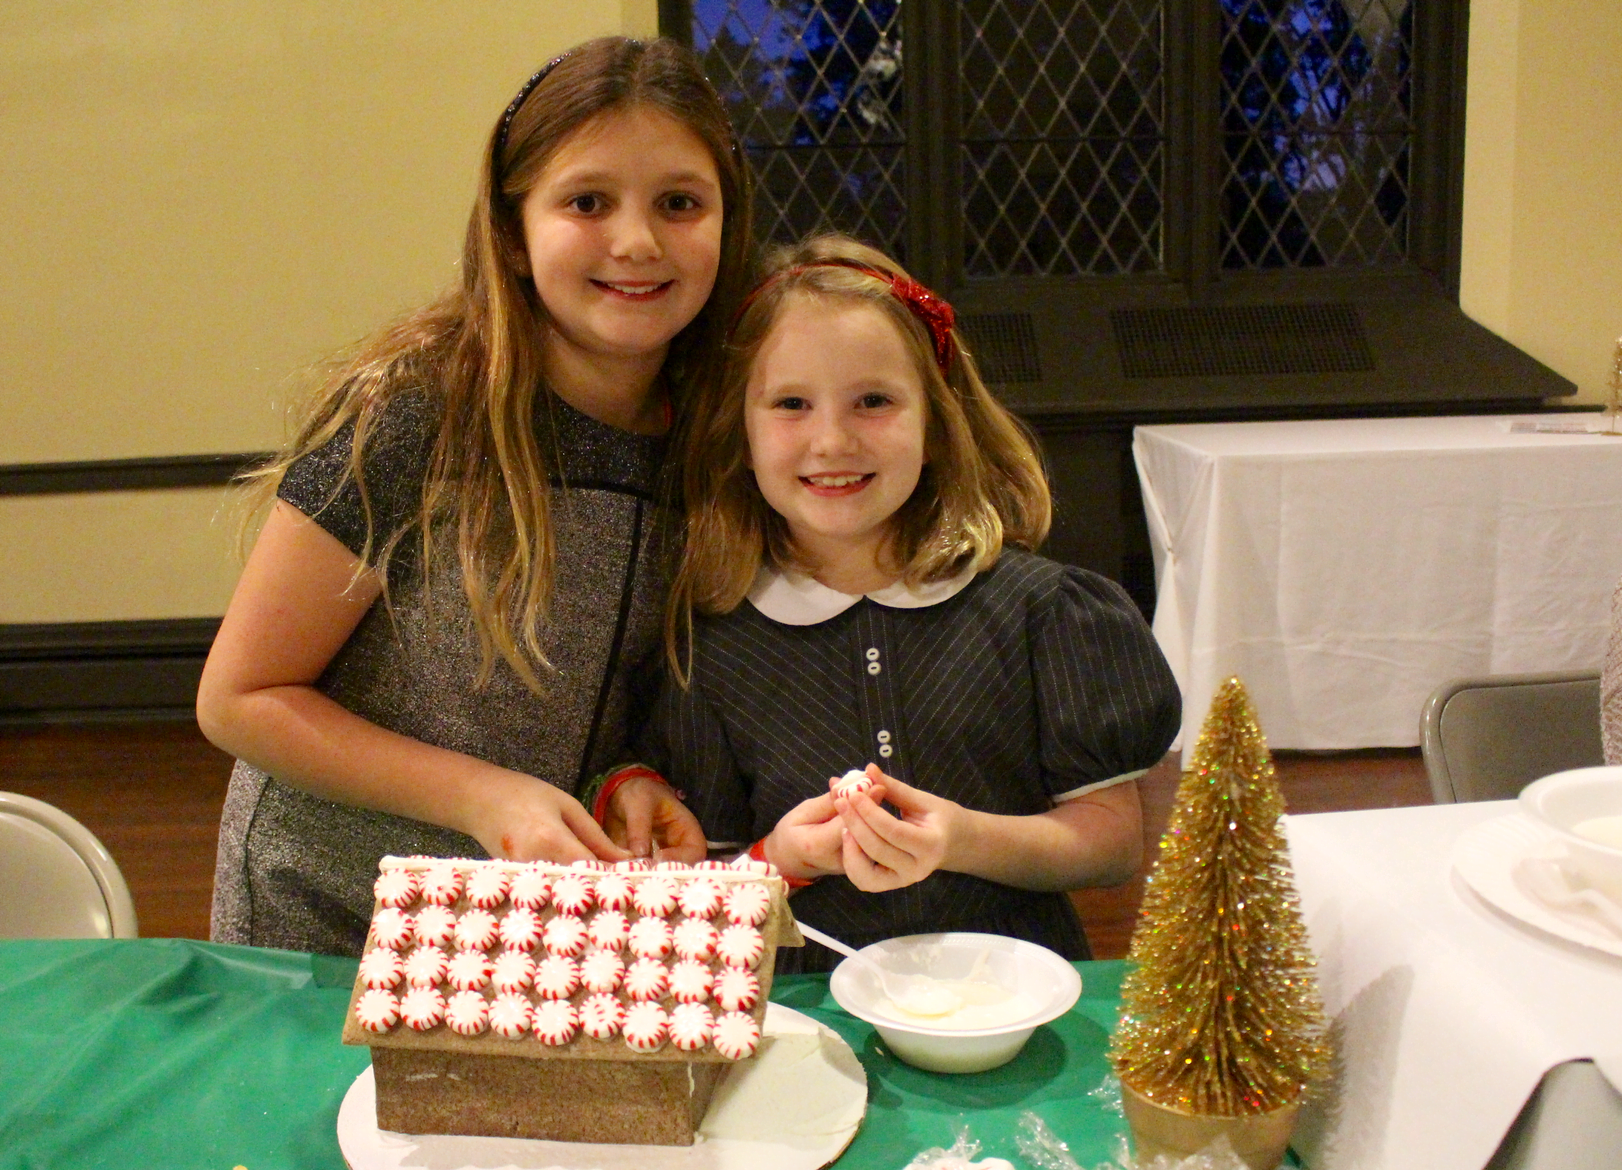 The Byxbee girls making a gingerbread house at The Enchanted Forest on Nov 17, 2017 Photo: Leslie Yager